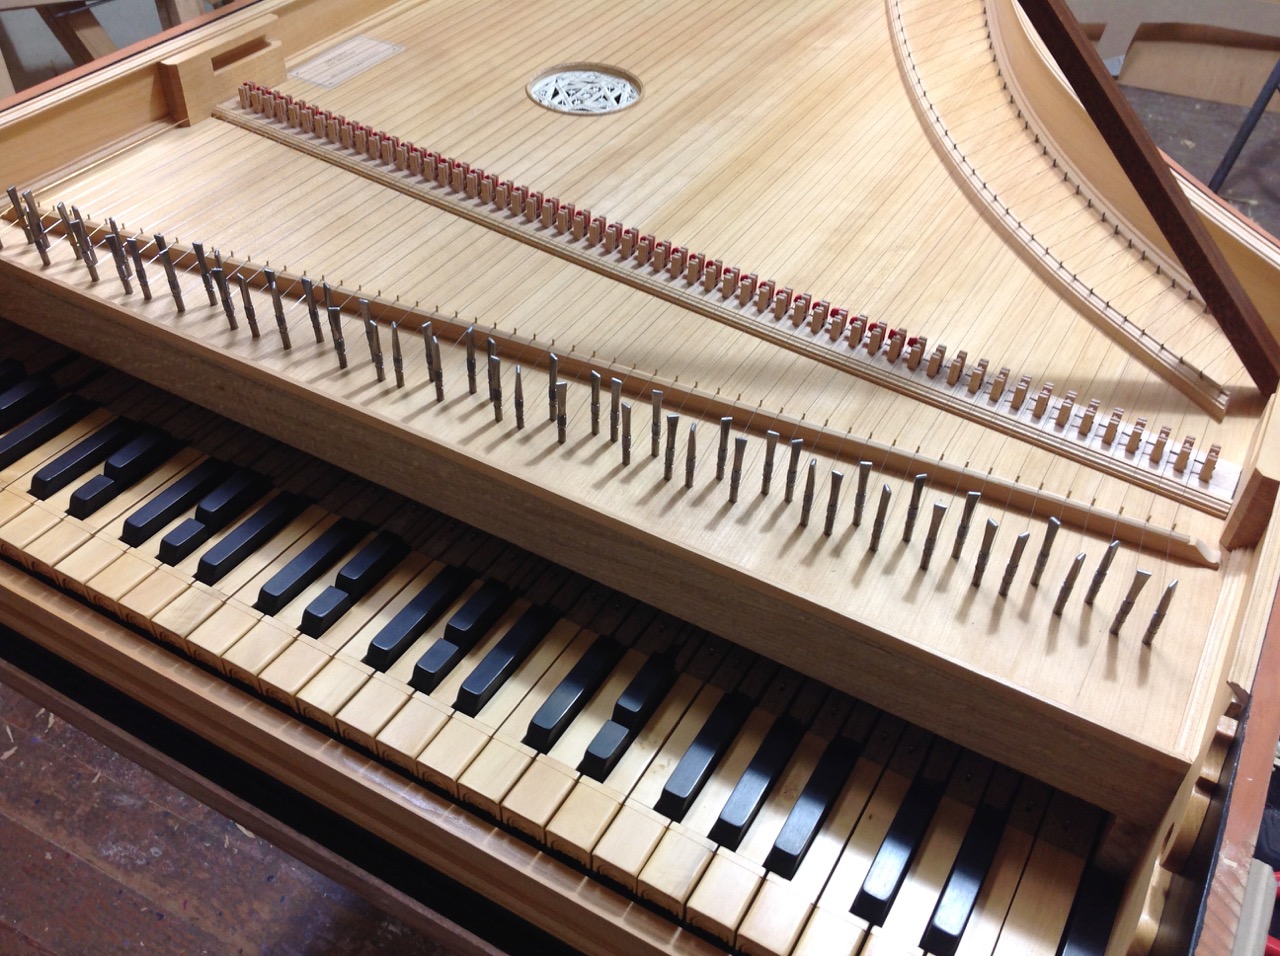 Instrument Makers with Pluck » Early Music America